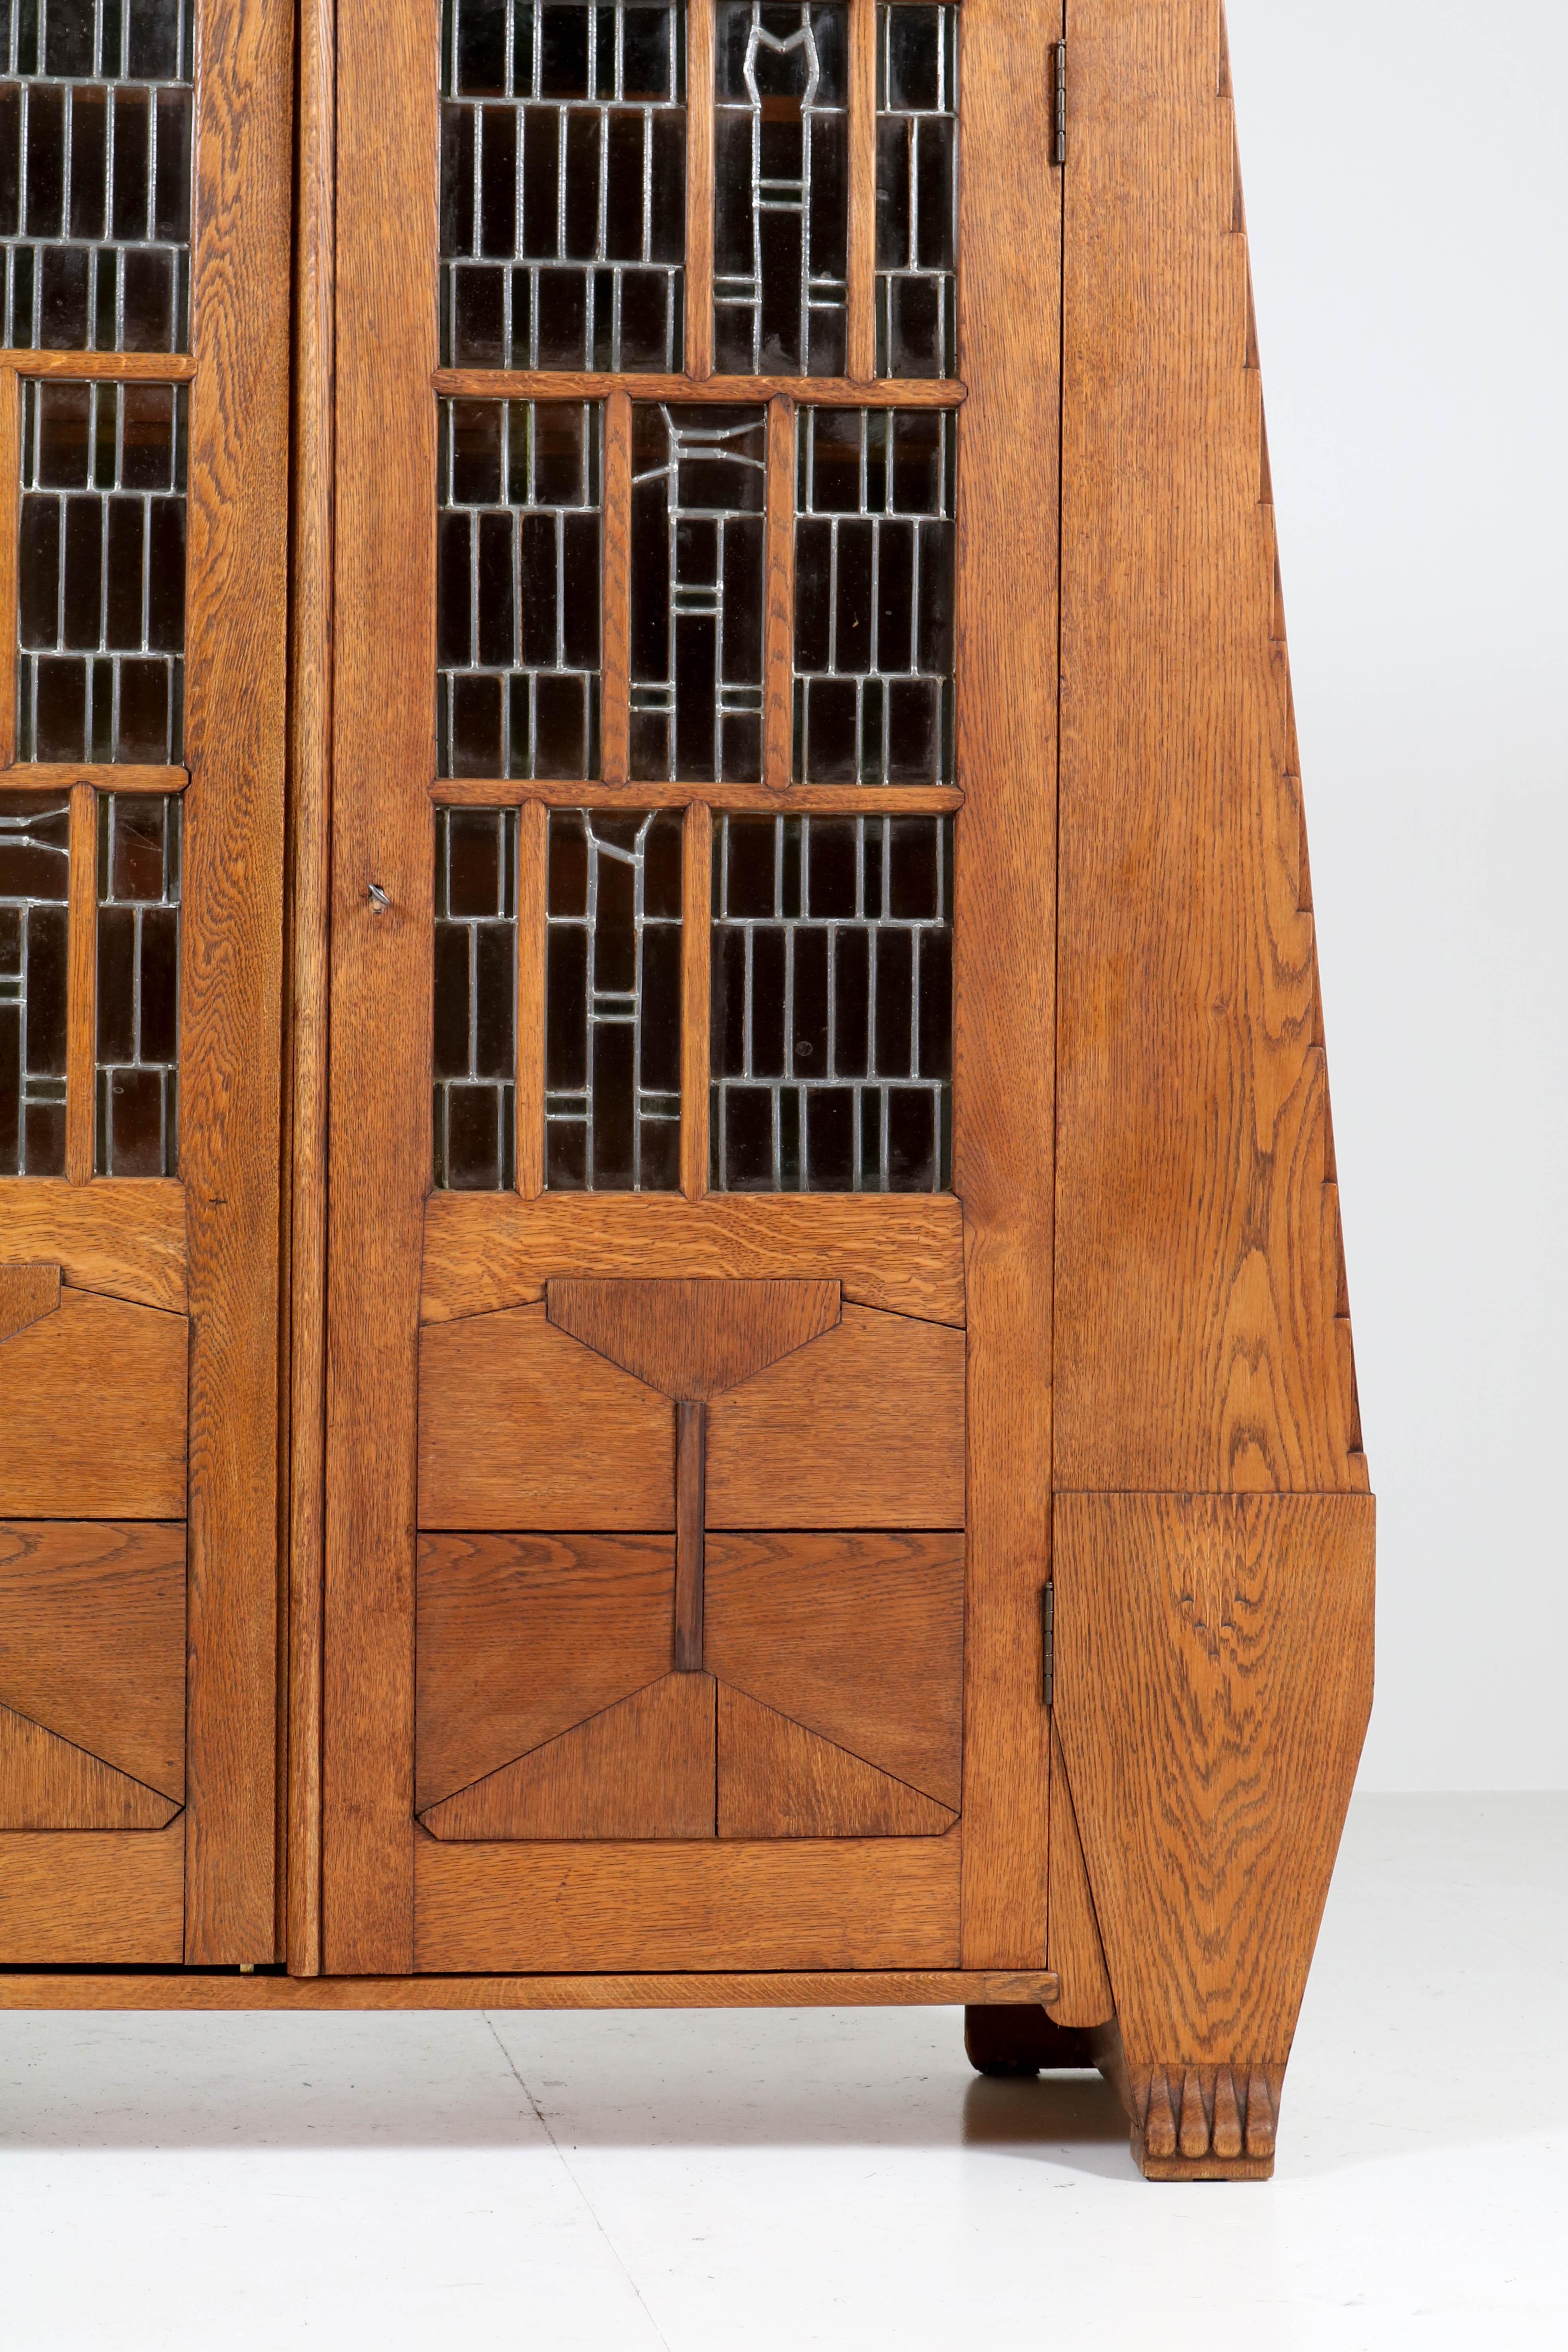 Oak Art Deco Amsterdam School Bookcase with Stained Glass by Hildo Krop, 1918 7